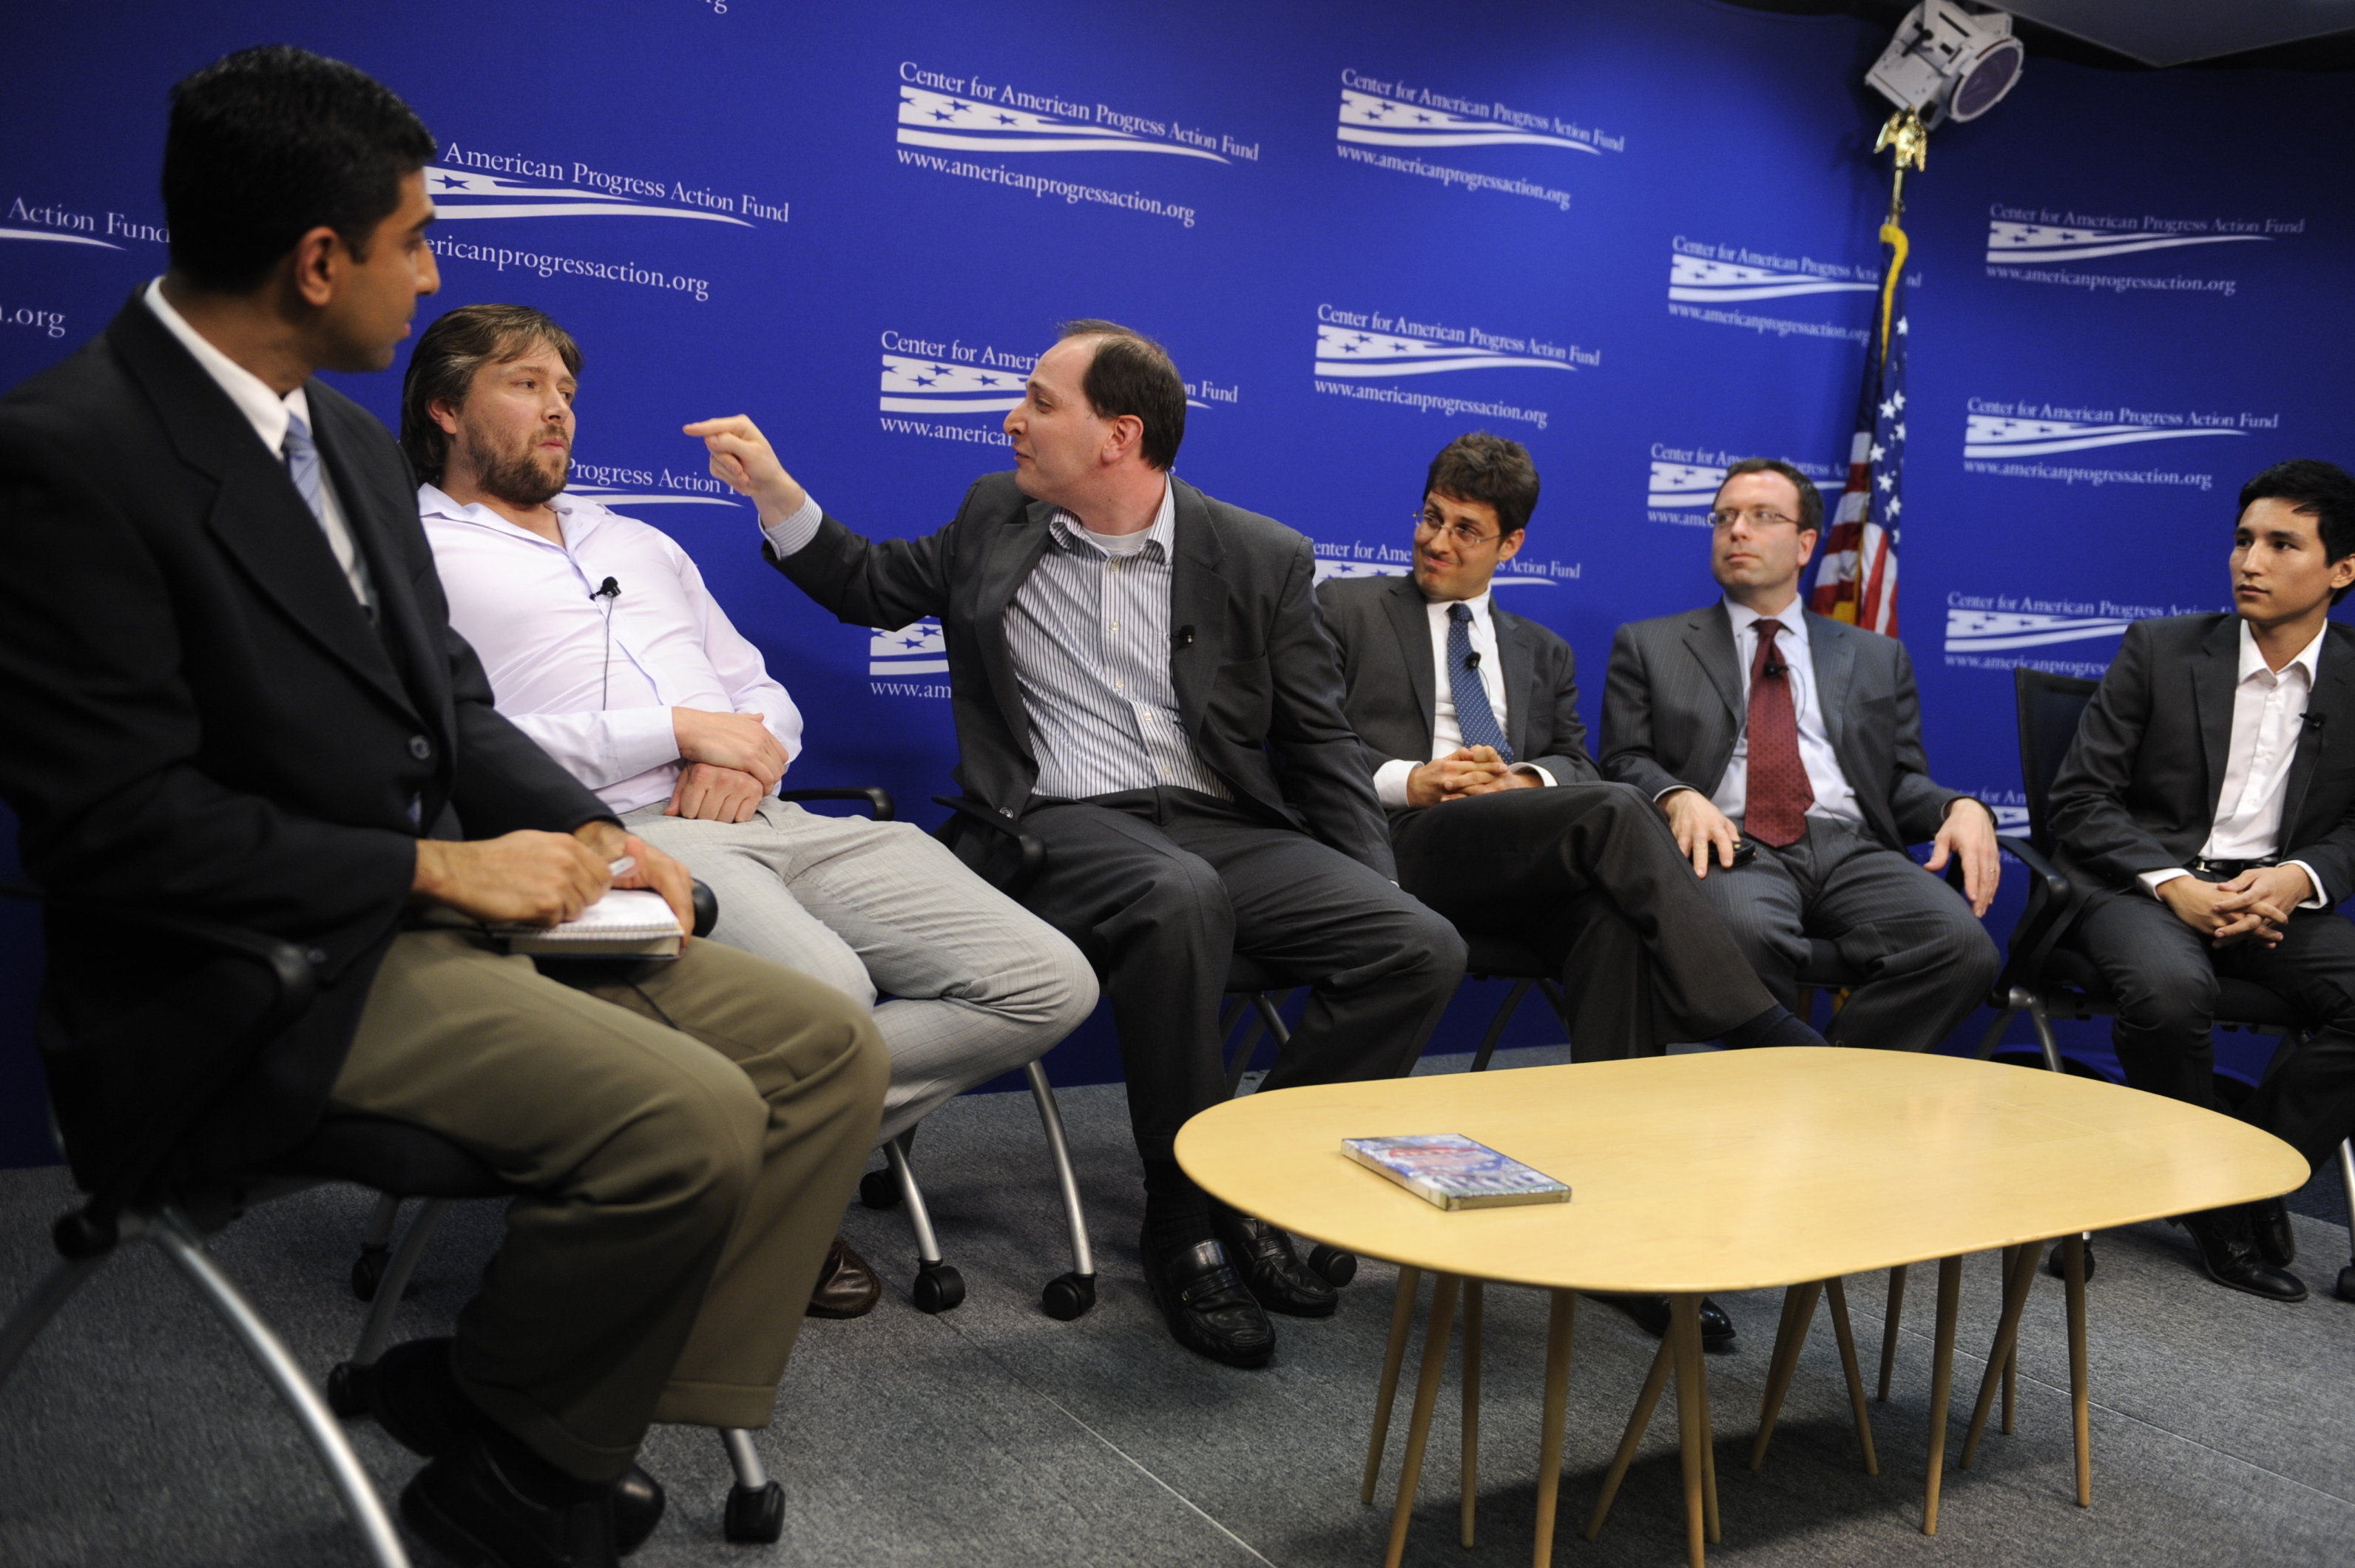 Phil Kerpen of Americans For Prosperity gets into a heated discussion with producer Taki Oldham following a screening of the film (Astro) Turf Wars as Faiz Shakir, Brad Johnson, Dana Milbank (Washington Post) and Lee Fang (The Nation) watch on.